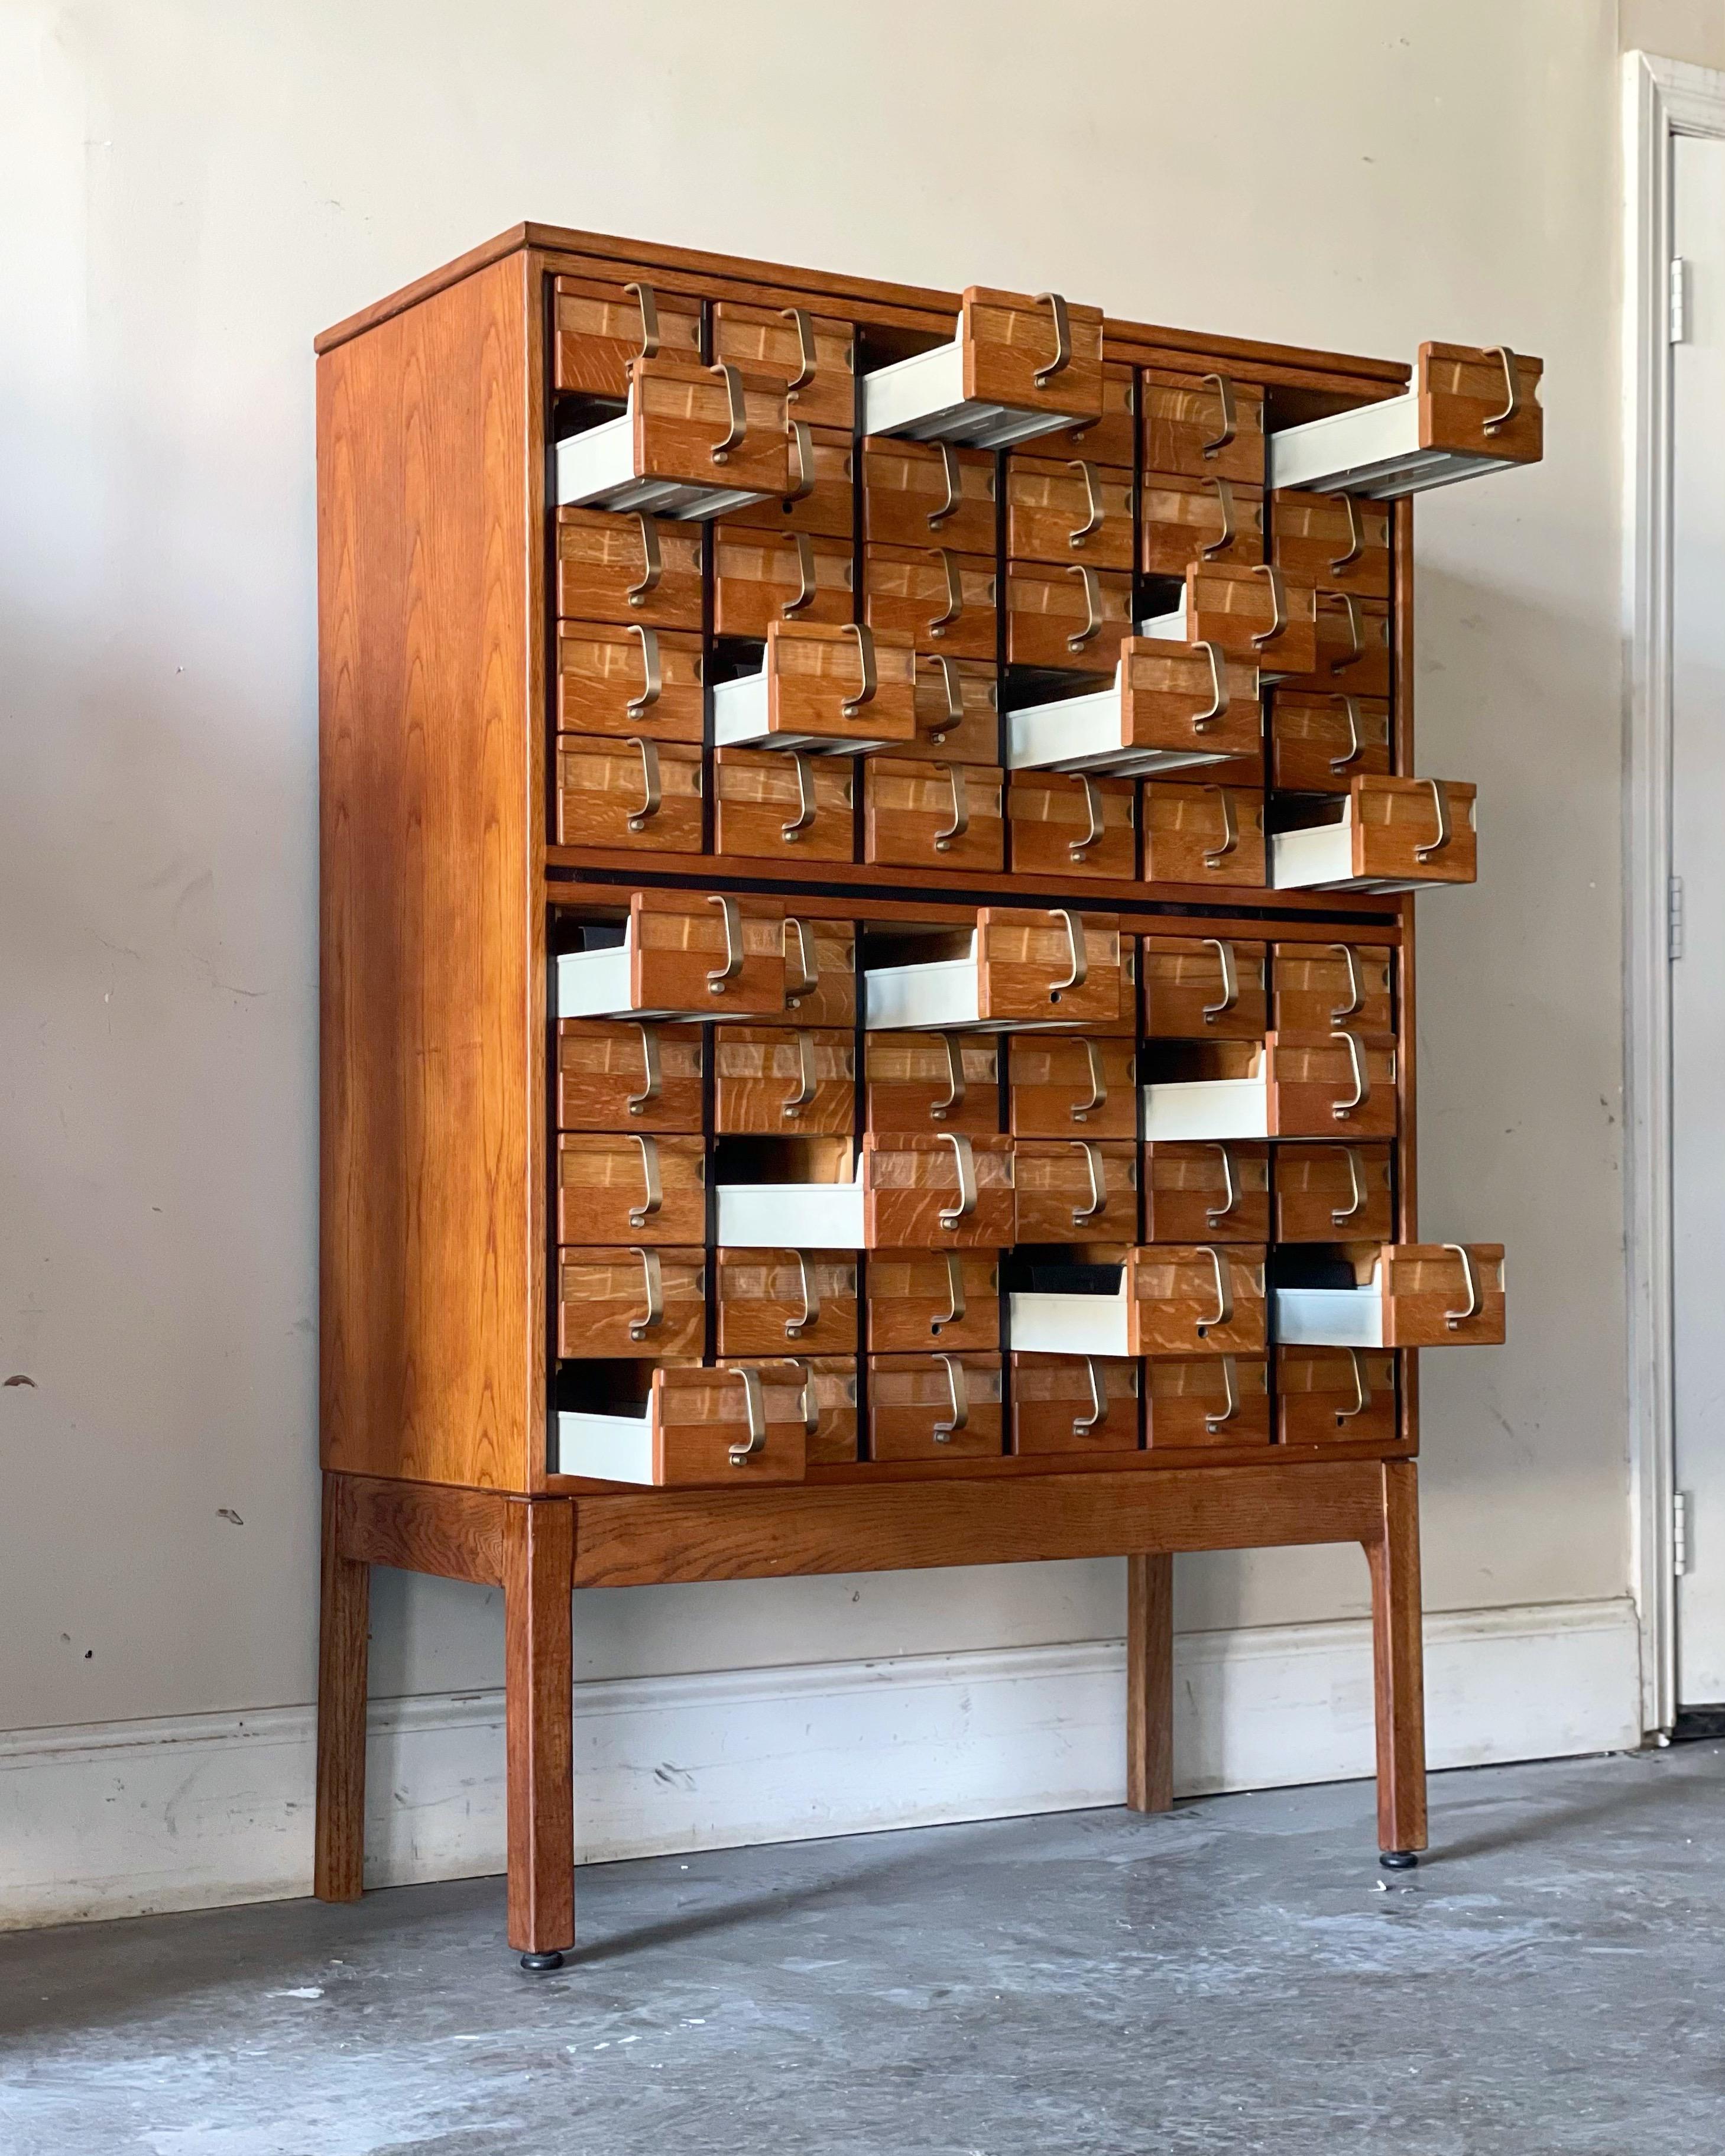 Scarce library card catalog in quarter sawn oak and solid brass by Jens Risom. Unique on the market. Truly a collectors piece. 60 drawers, each one embossed with the Risom logo. Stunning 3/4